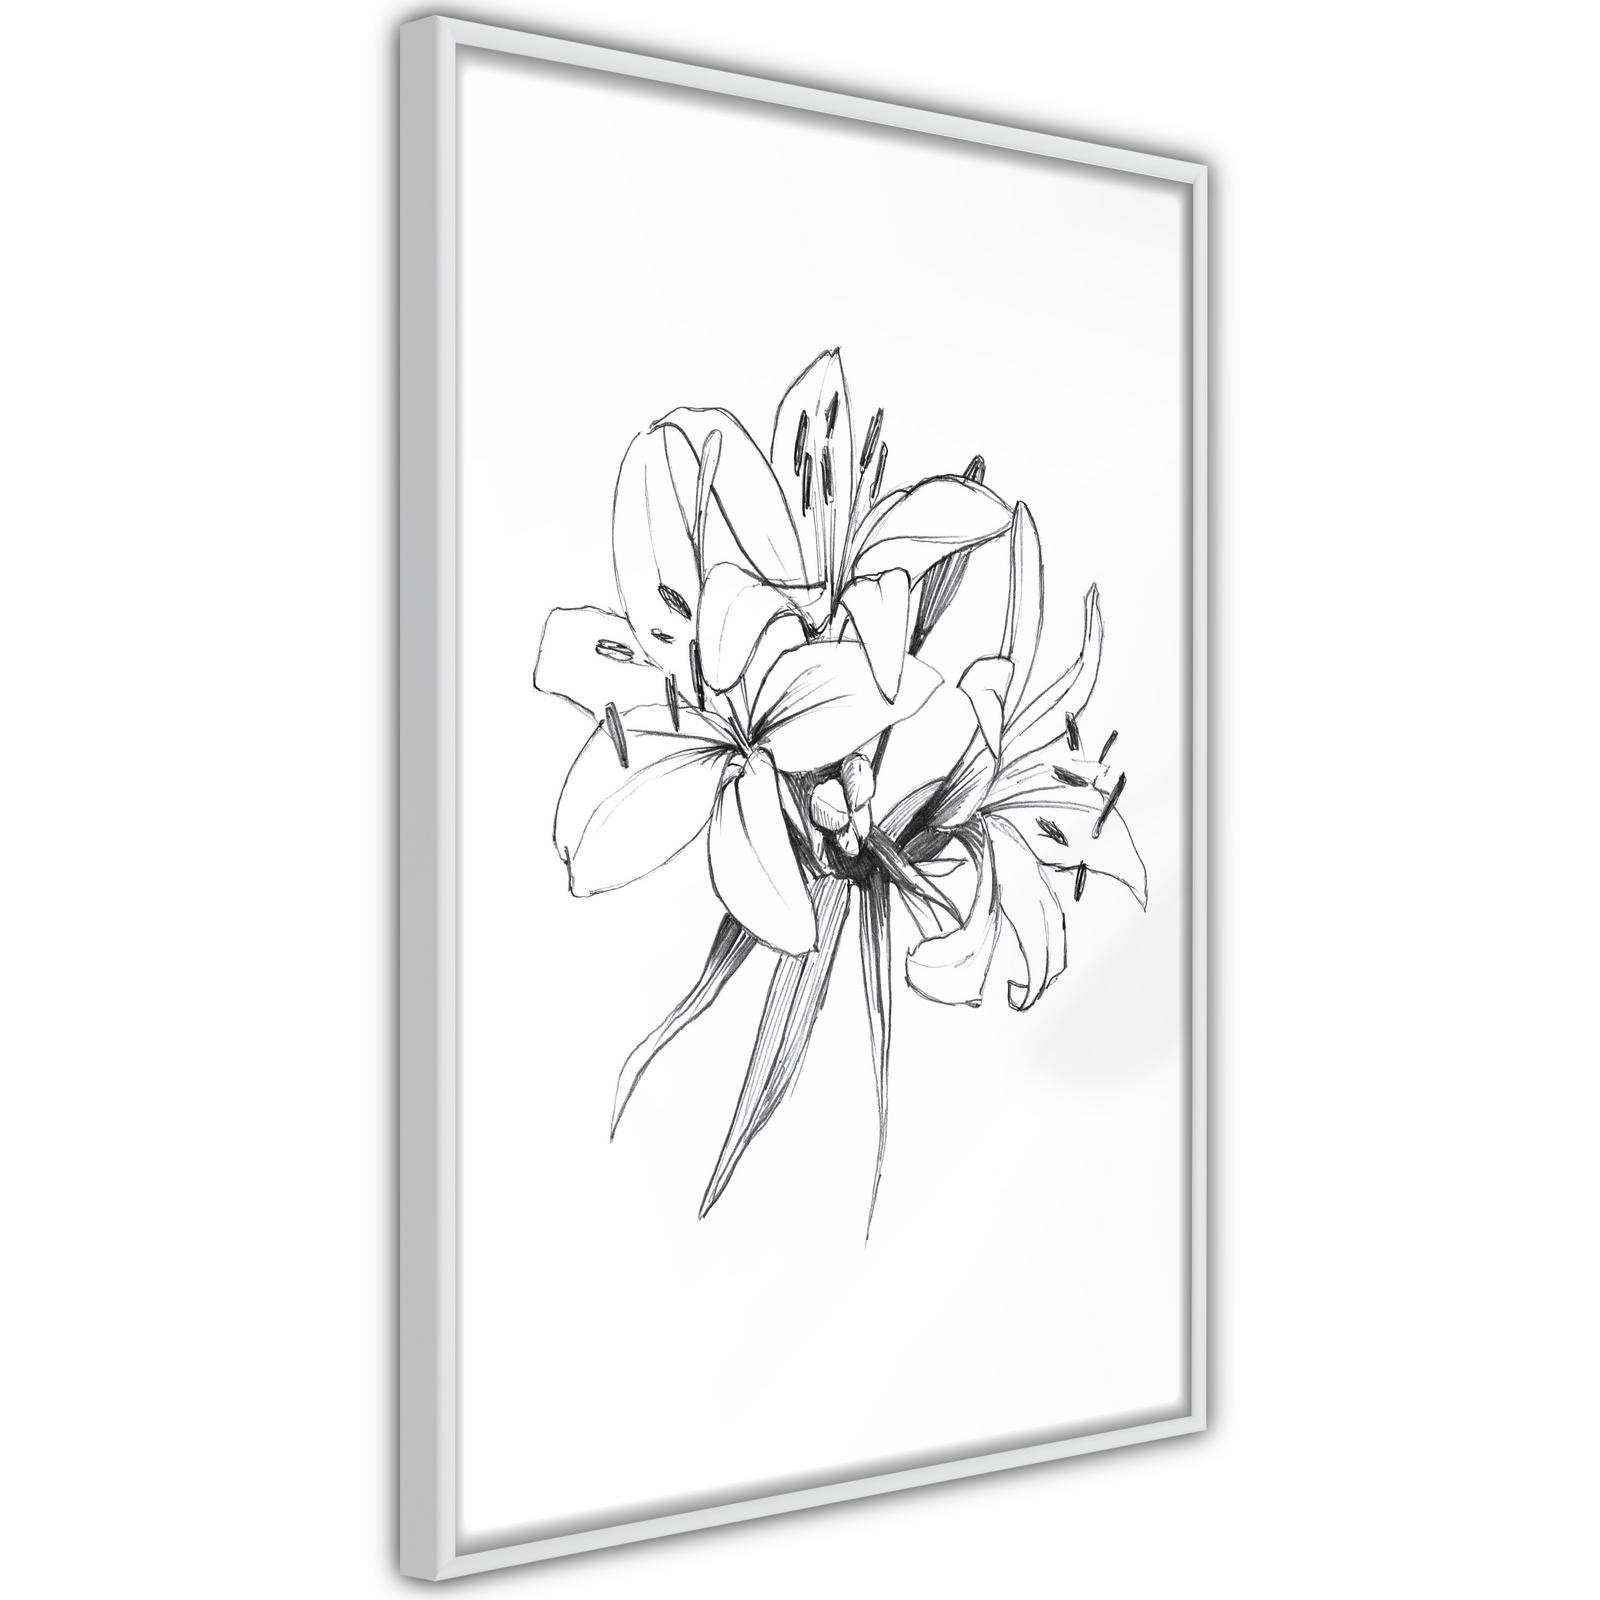 Inramad Poster / Tavla - Sketch of Lillies-Poster Inramad-Artgeist-peaceofhome.se